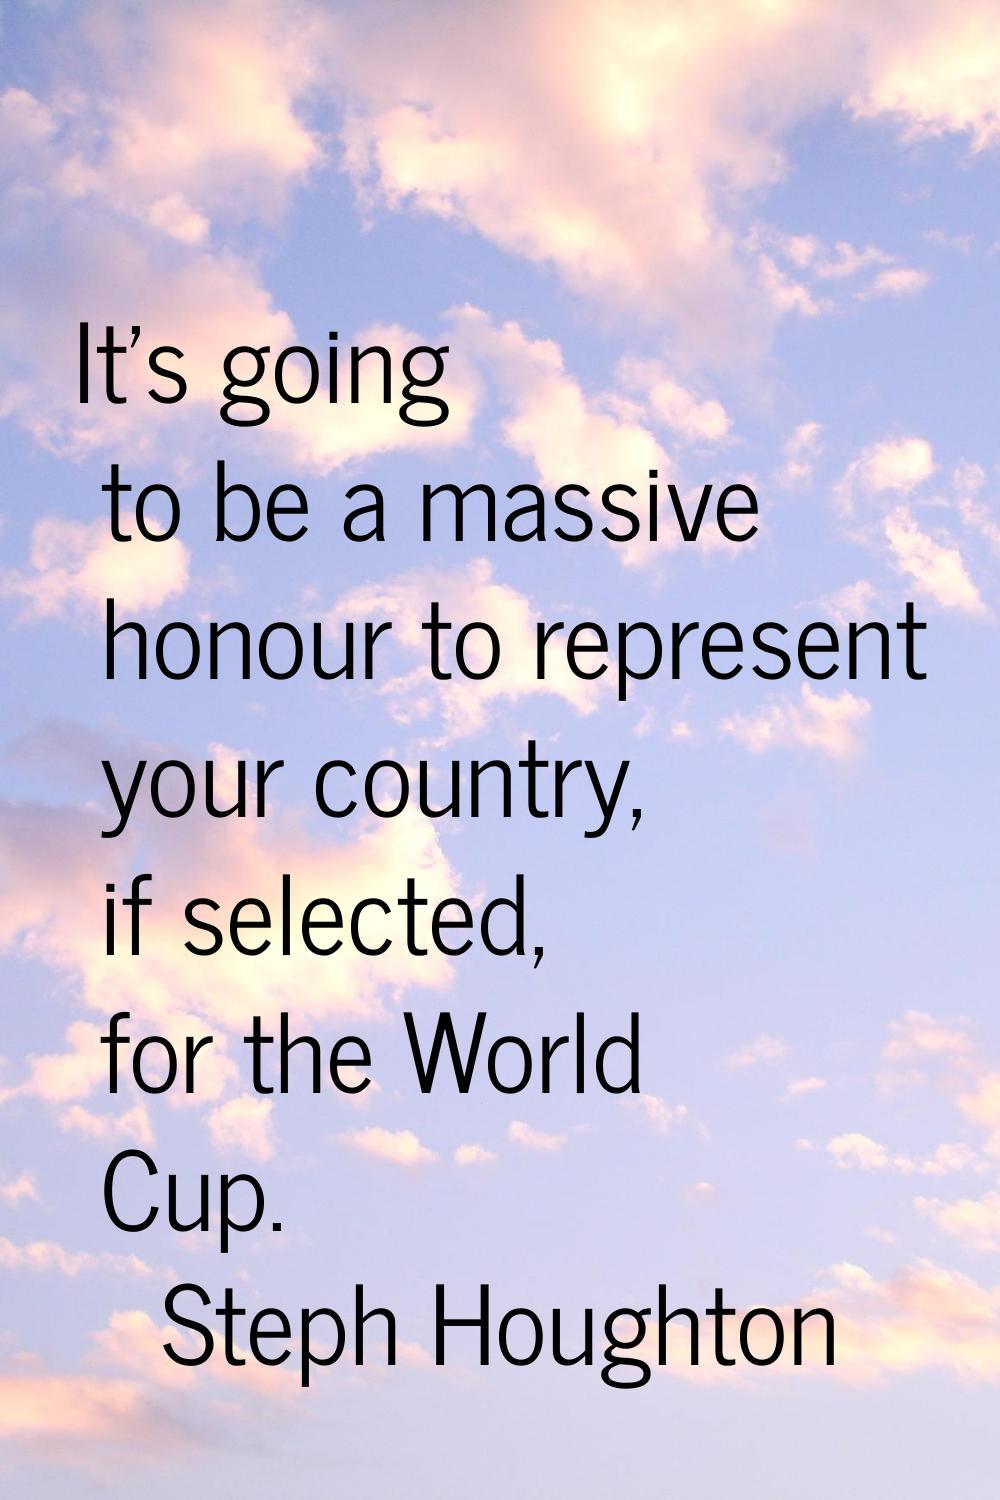 It's going to be a massive honour to represent your country, if selected, for the World Cup.